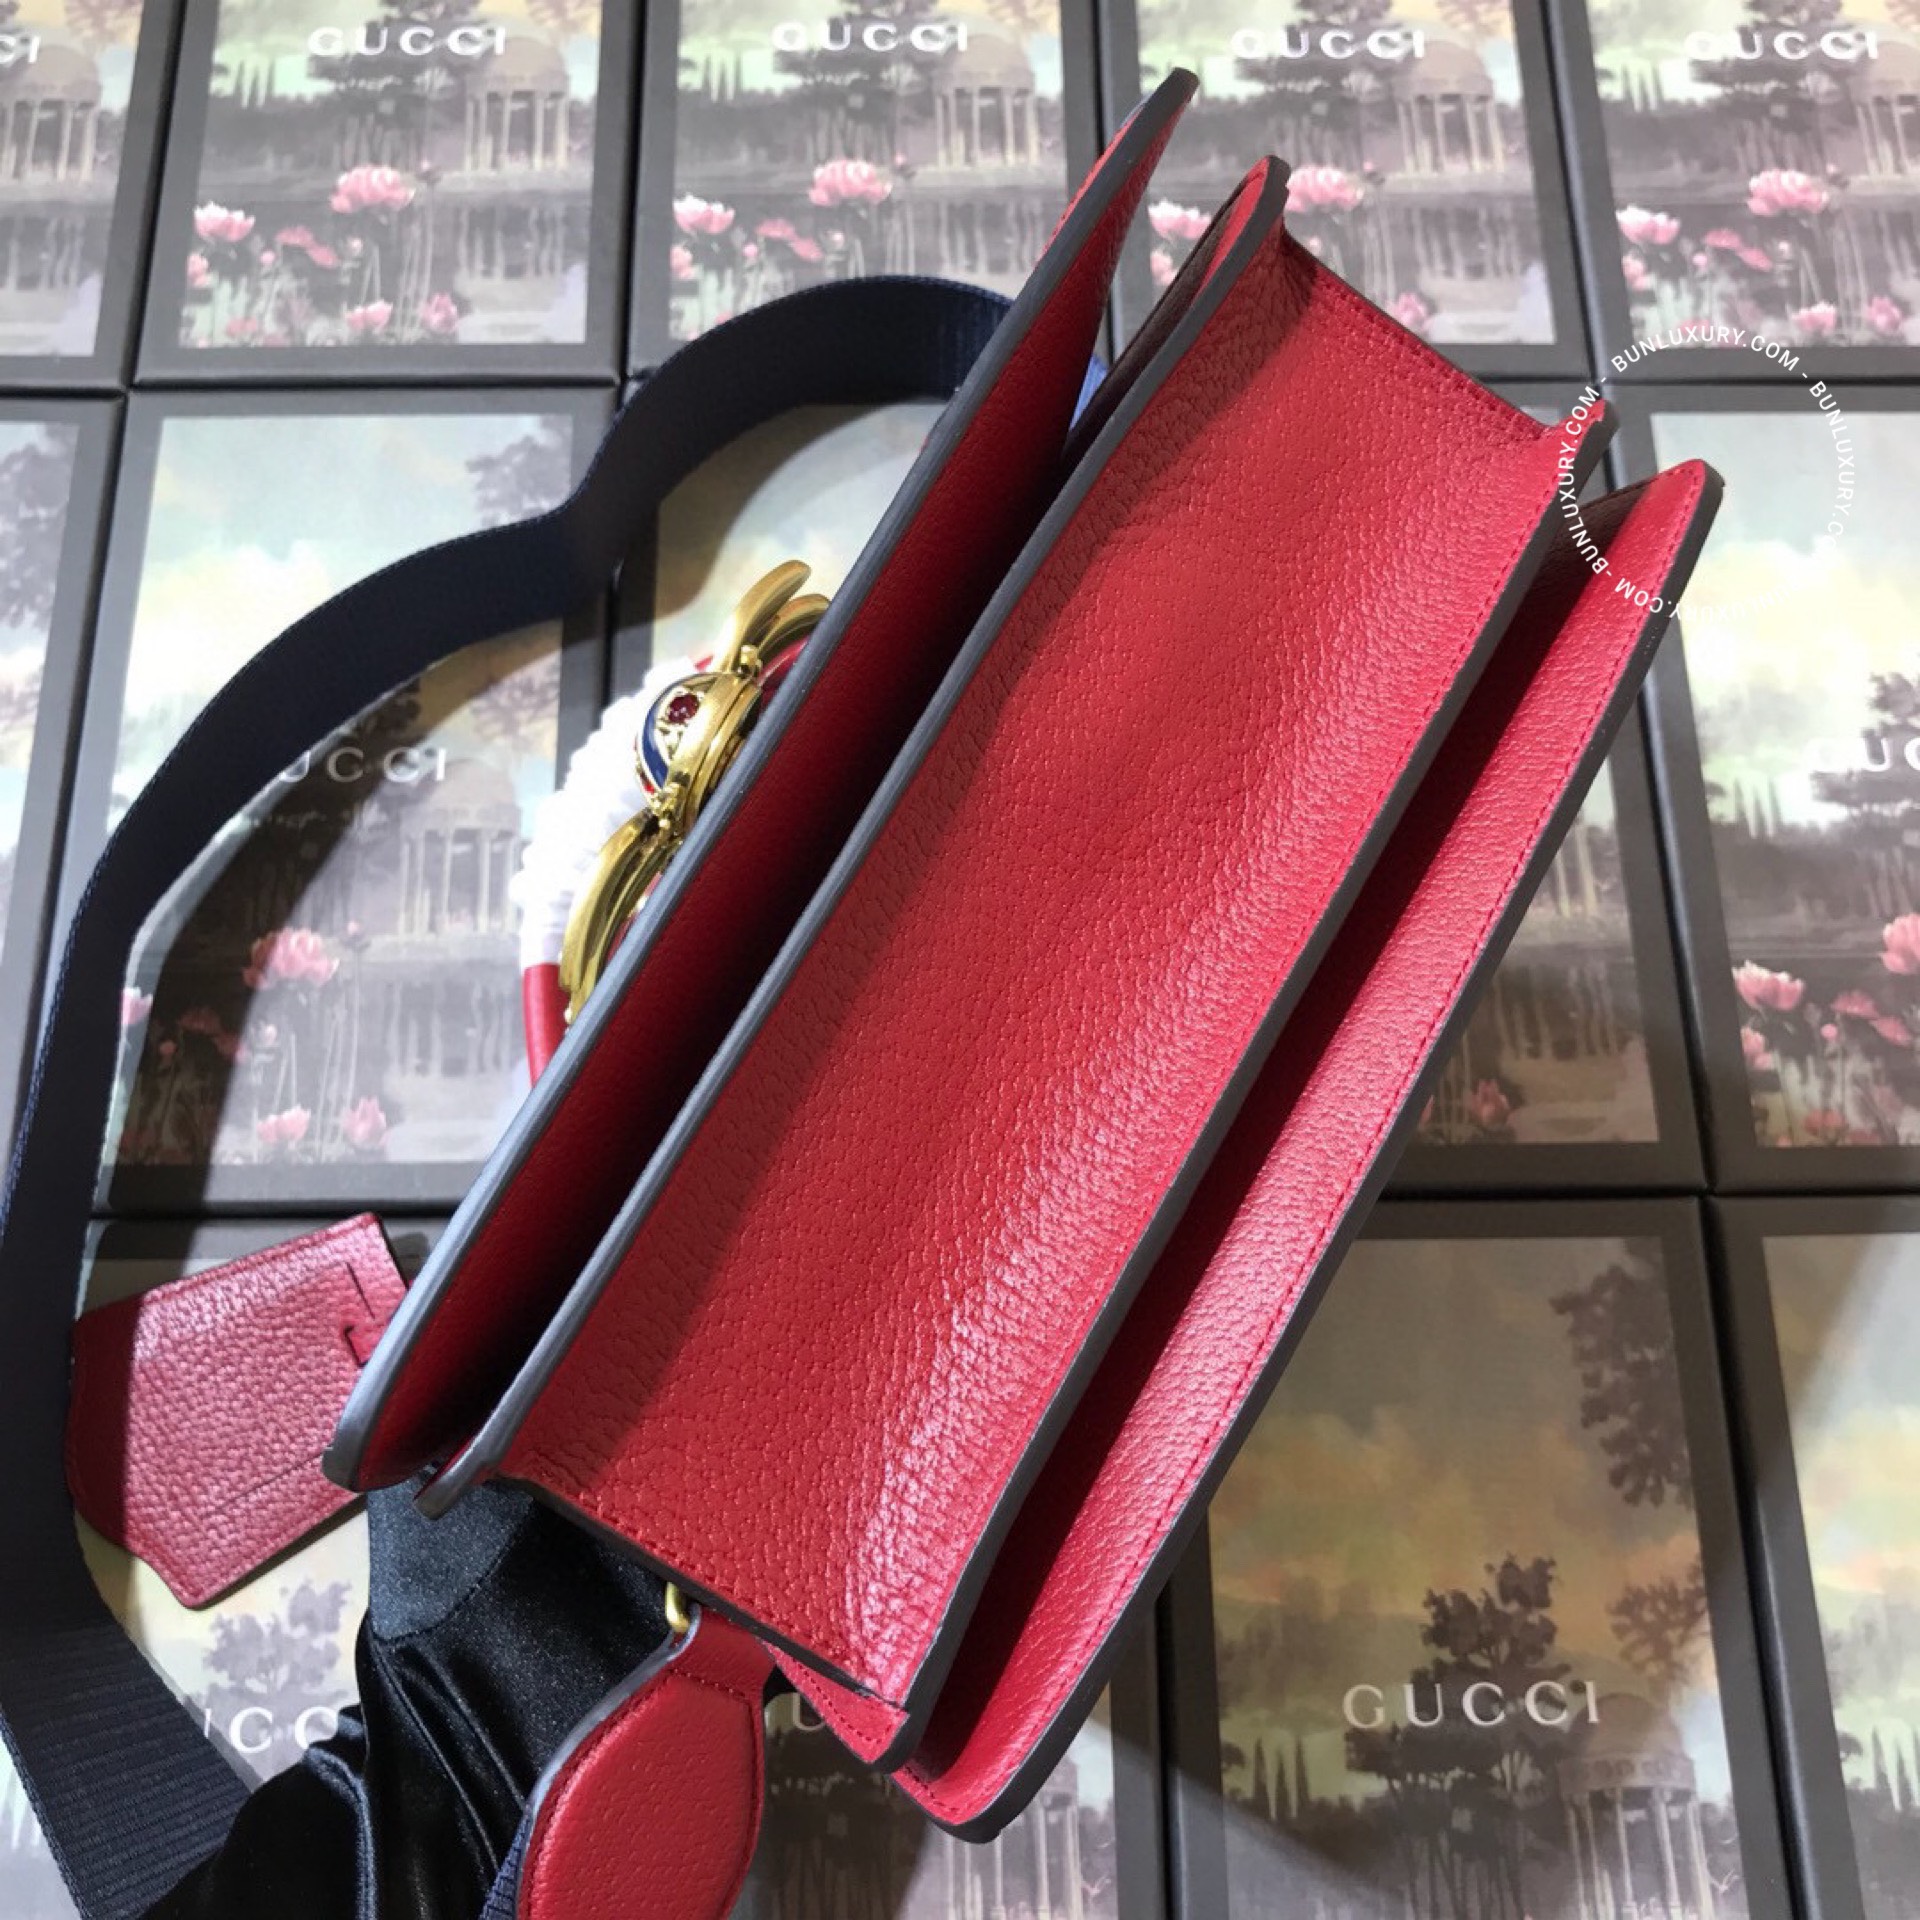 Túi Xách Gucci Queen Margaret Bee Red 476541